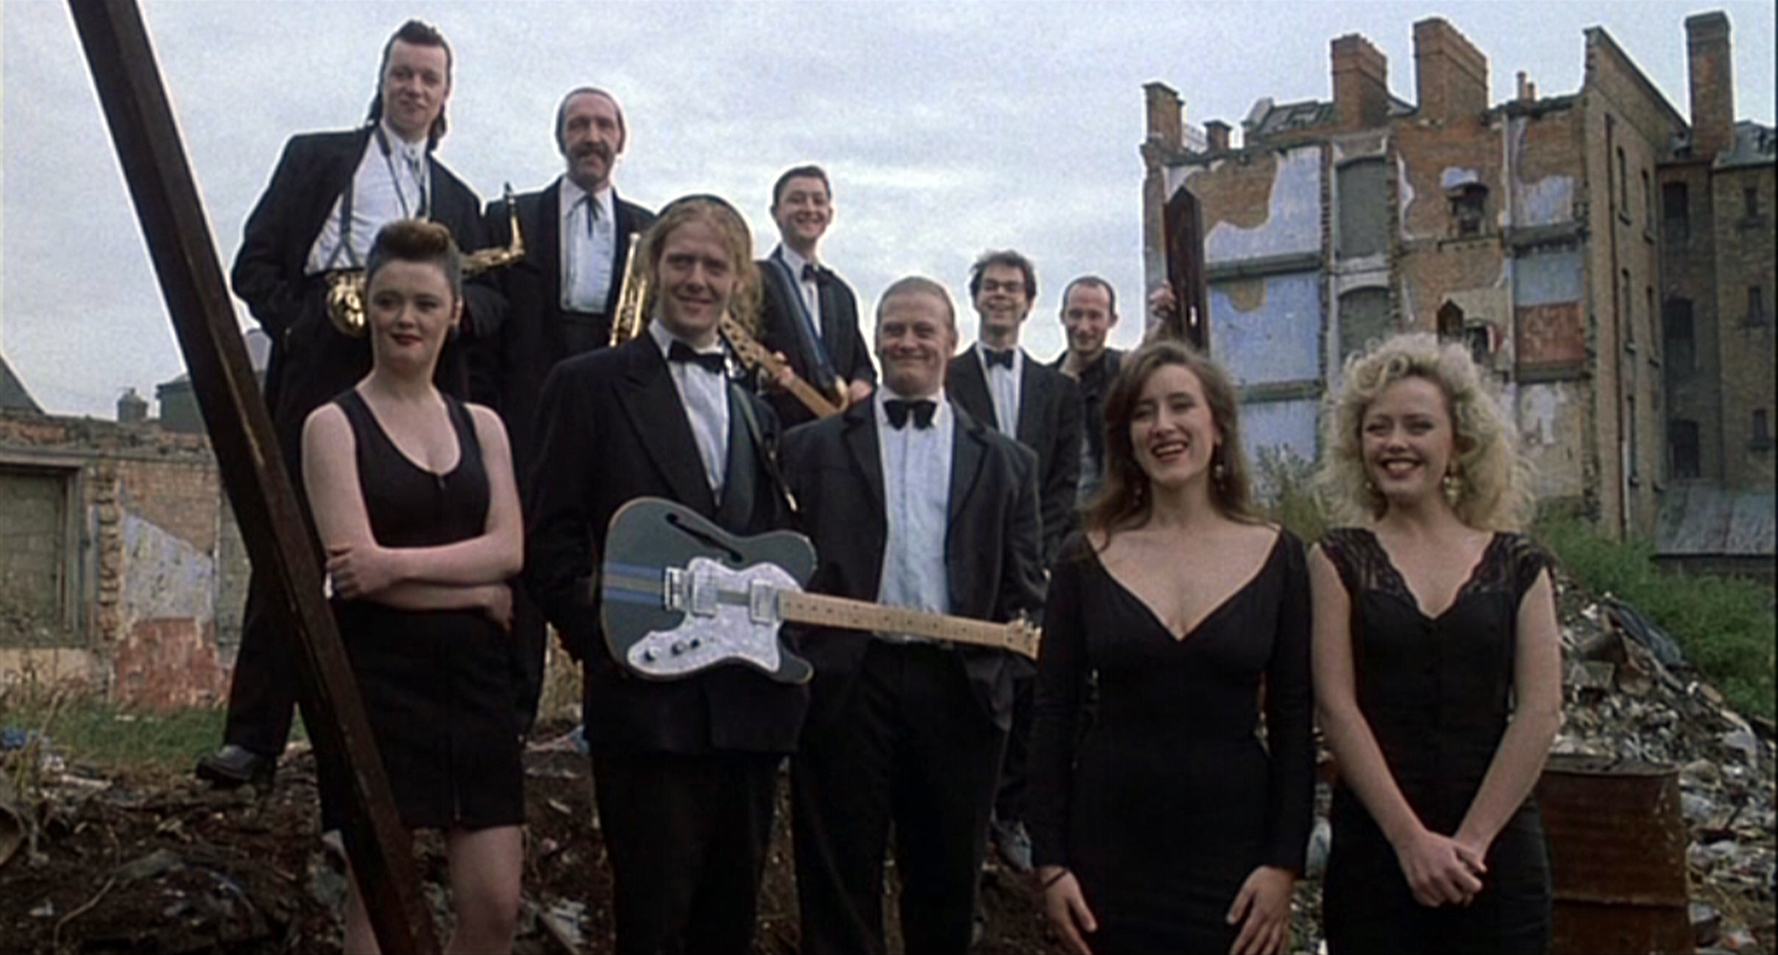 the_commitments